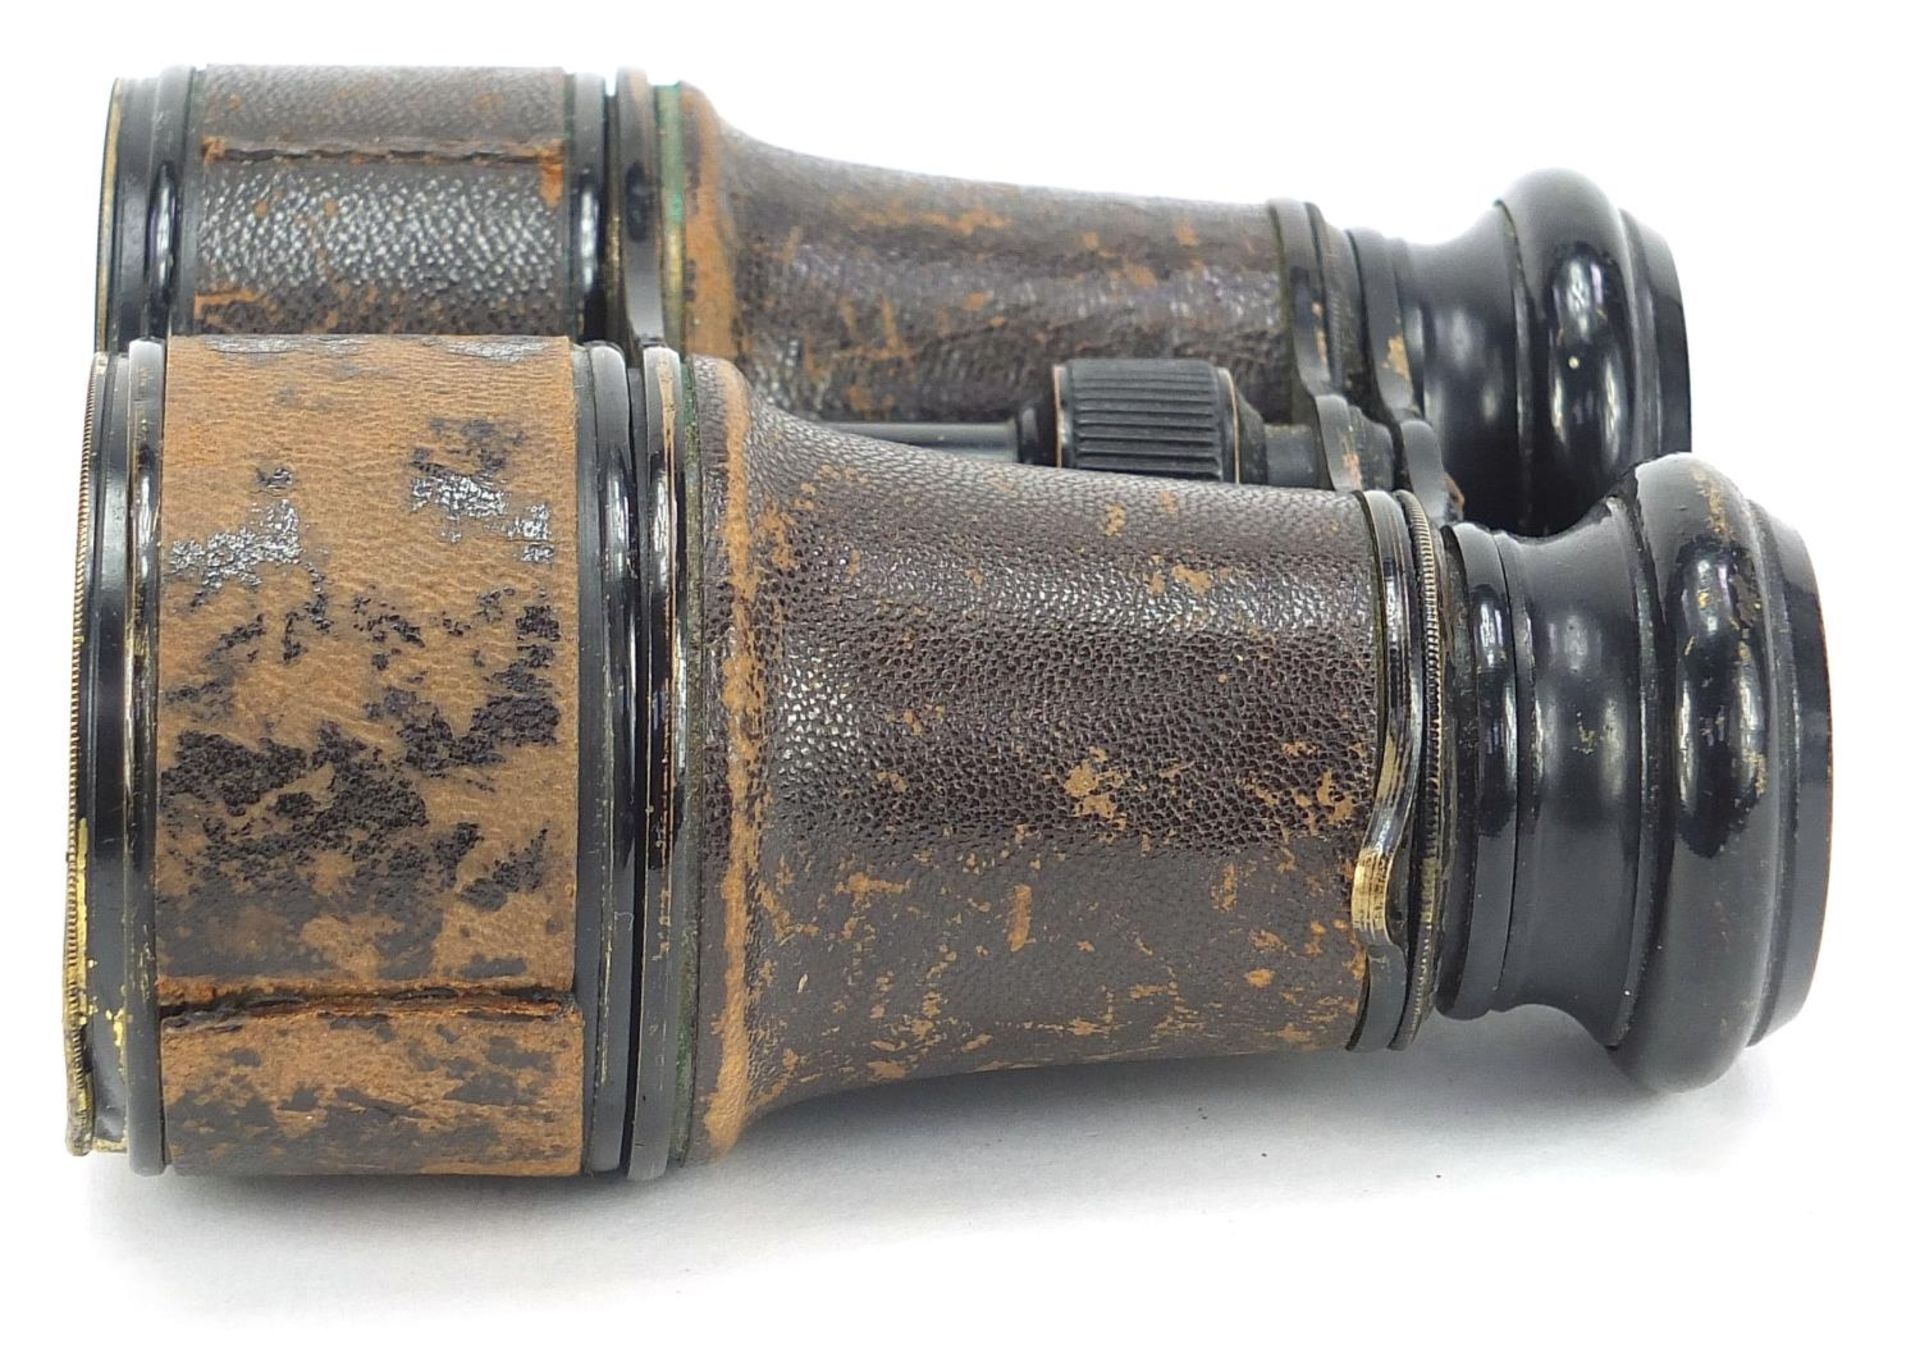 British military World War I pair and leather bound binoculars, the pair awarded to 1482CPL.H.TUTT. - Image 2 of 8